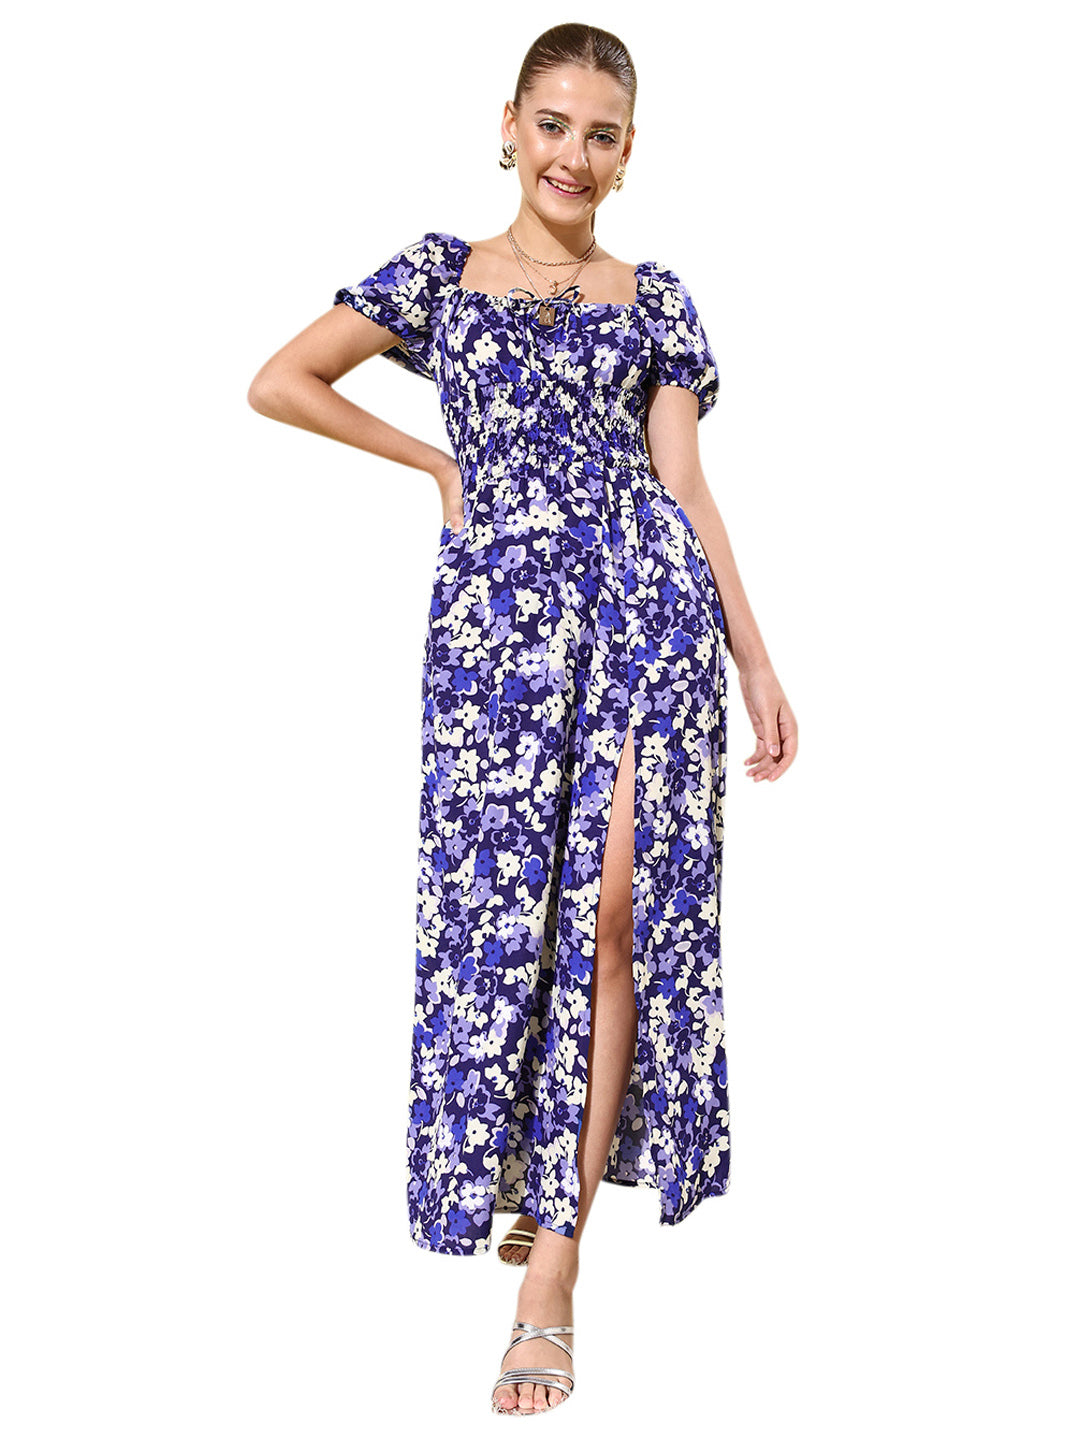 Women's Blue Floral Maxi Dress with Puffed Sleeve